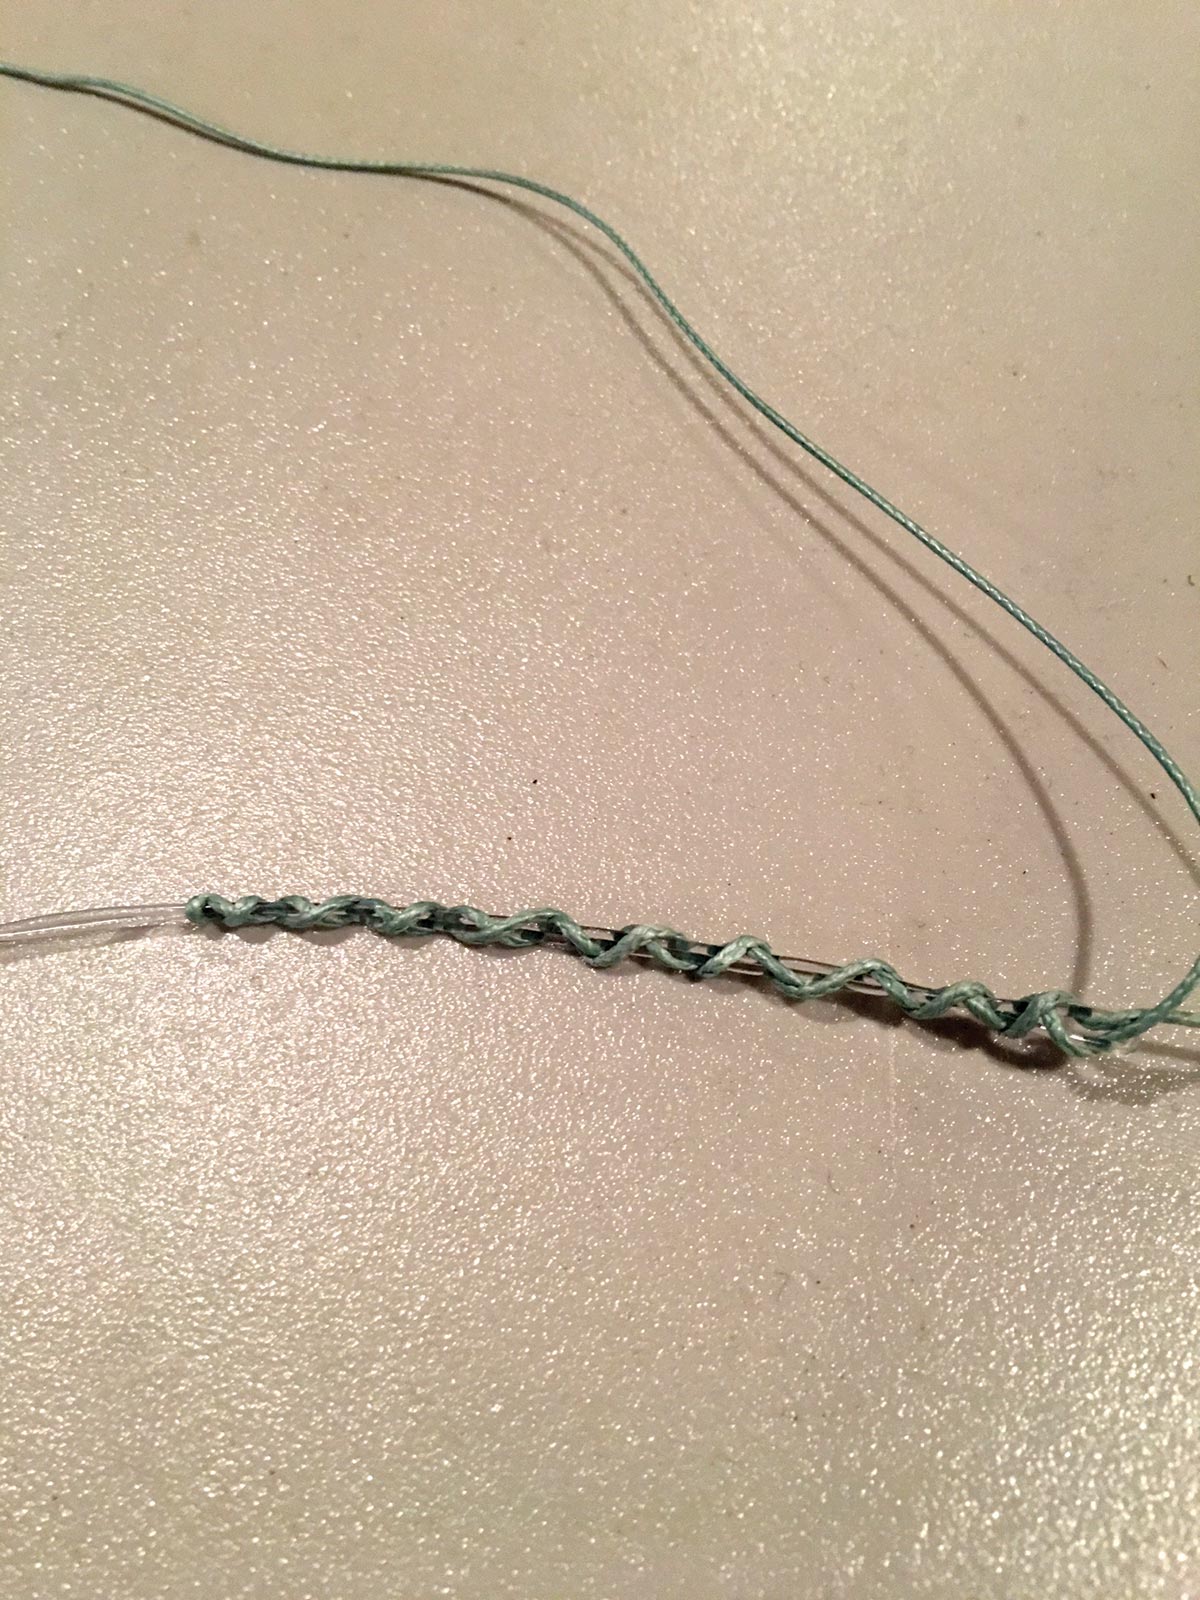 Alberto knot connecting braid and mono.